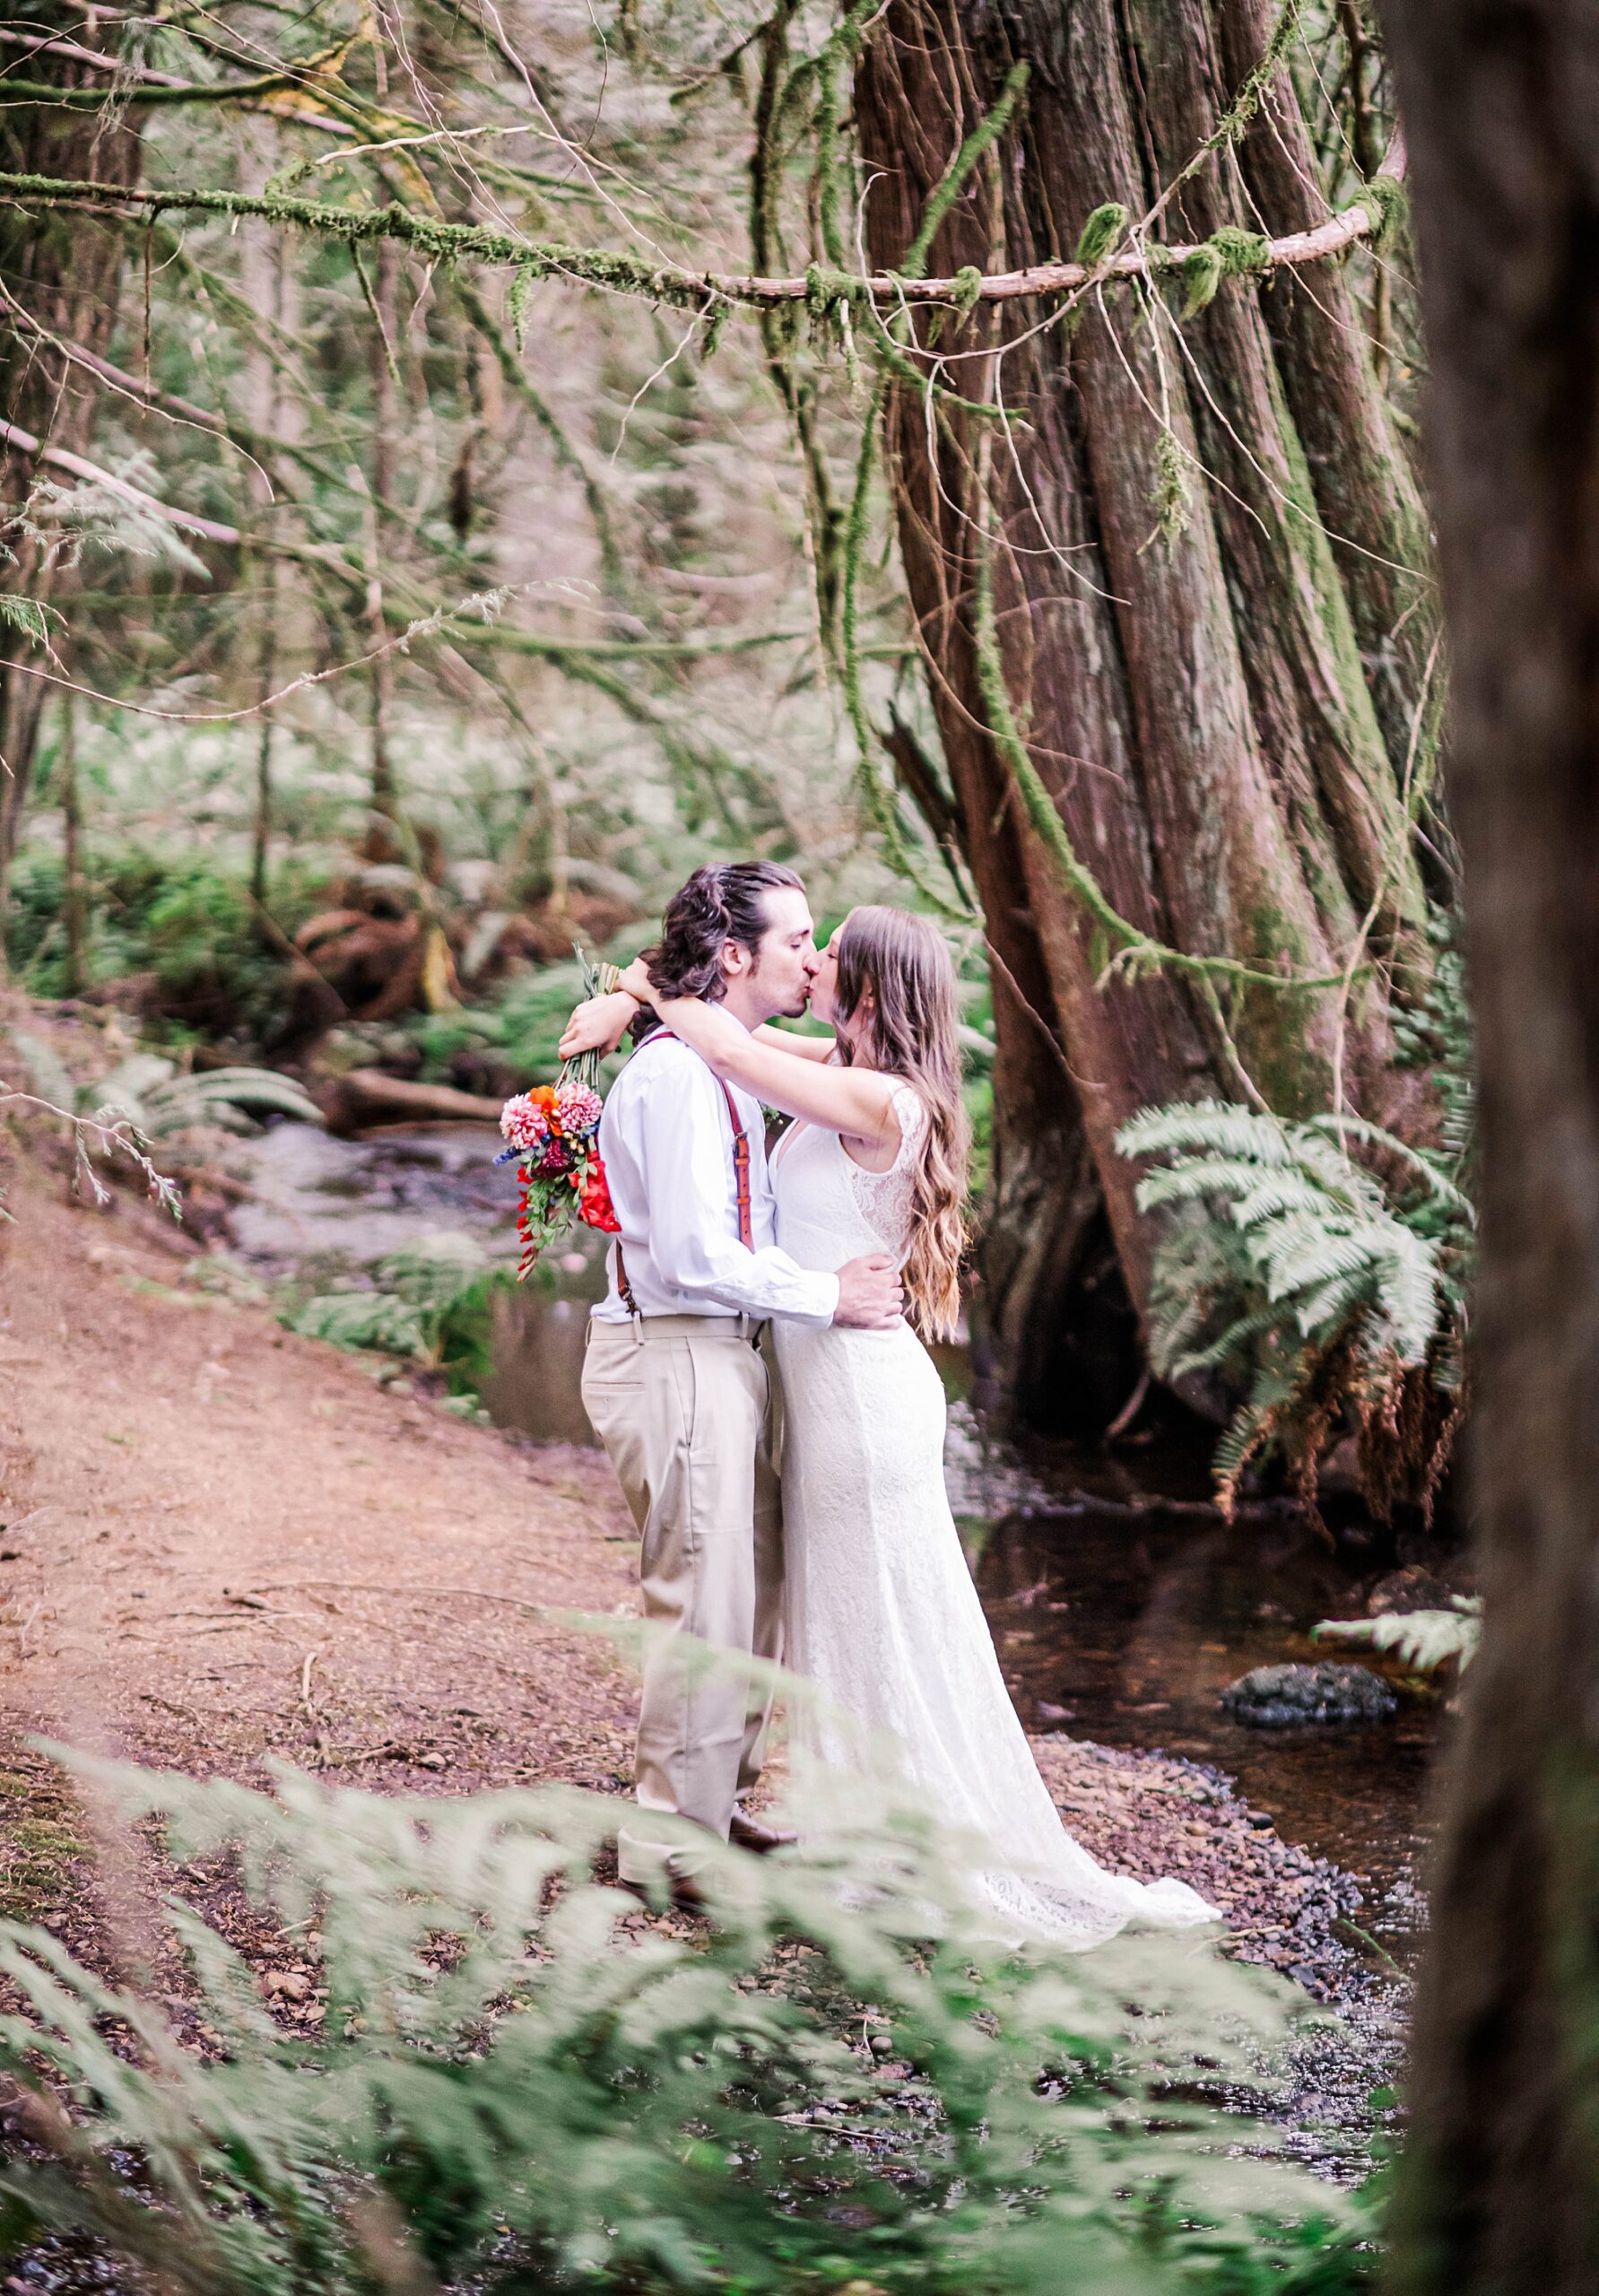 Newlyweds kiss in forest after ceremony